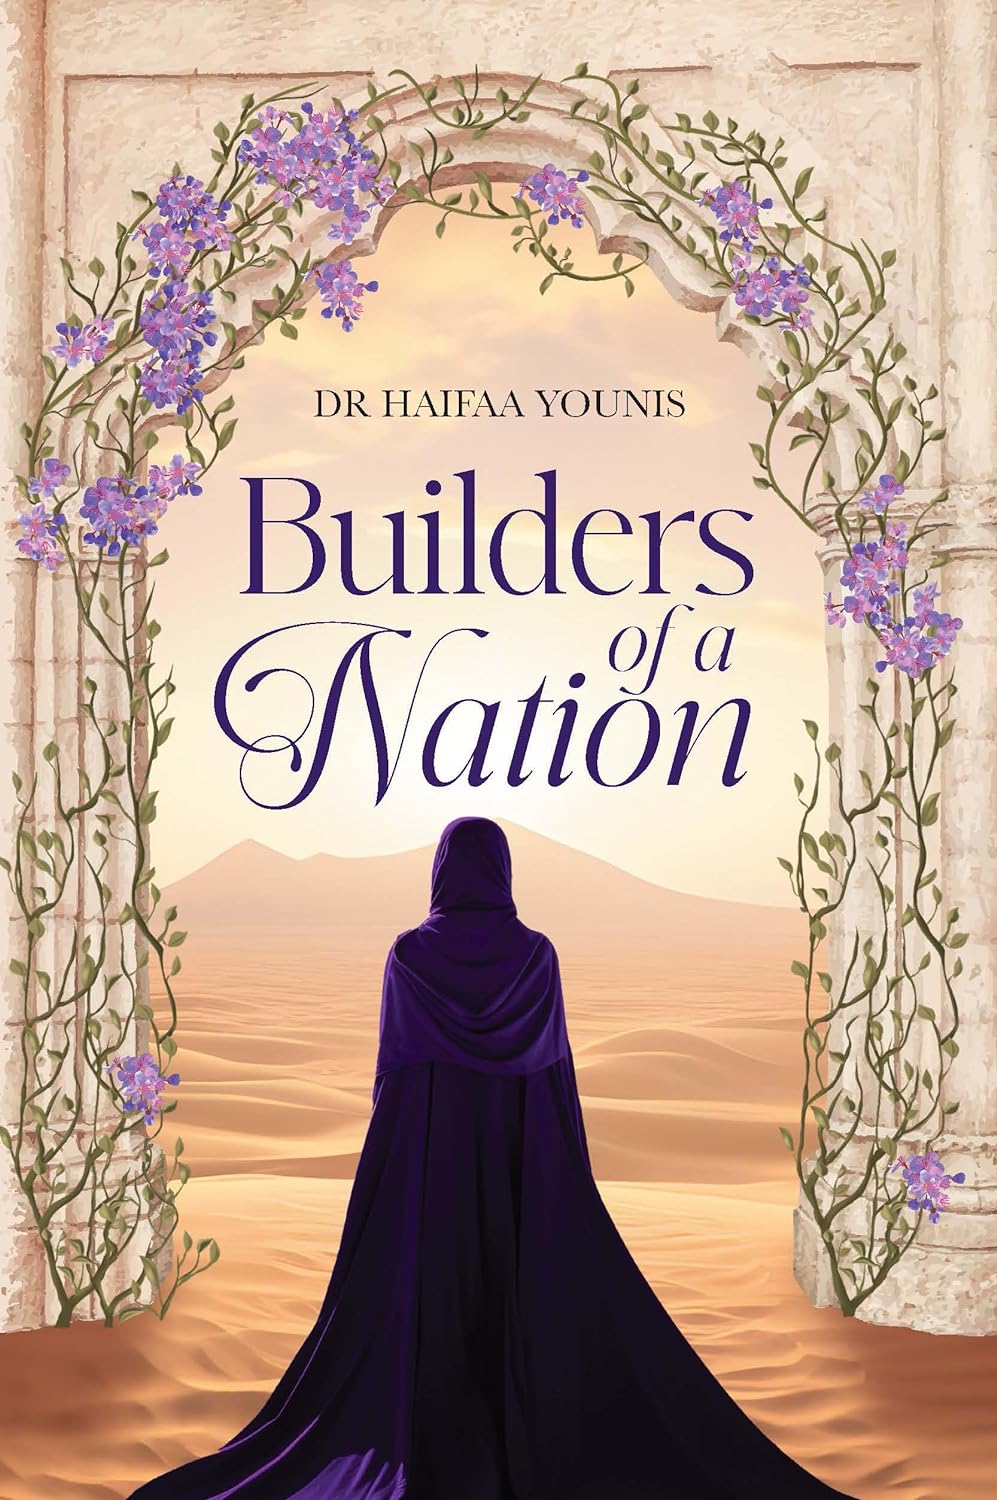 Builders of a Nation: Dr Haifaa Younis